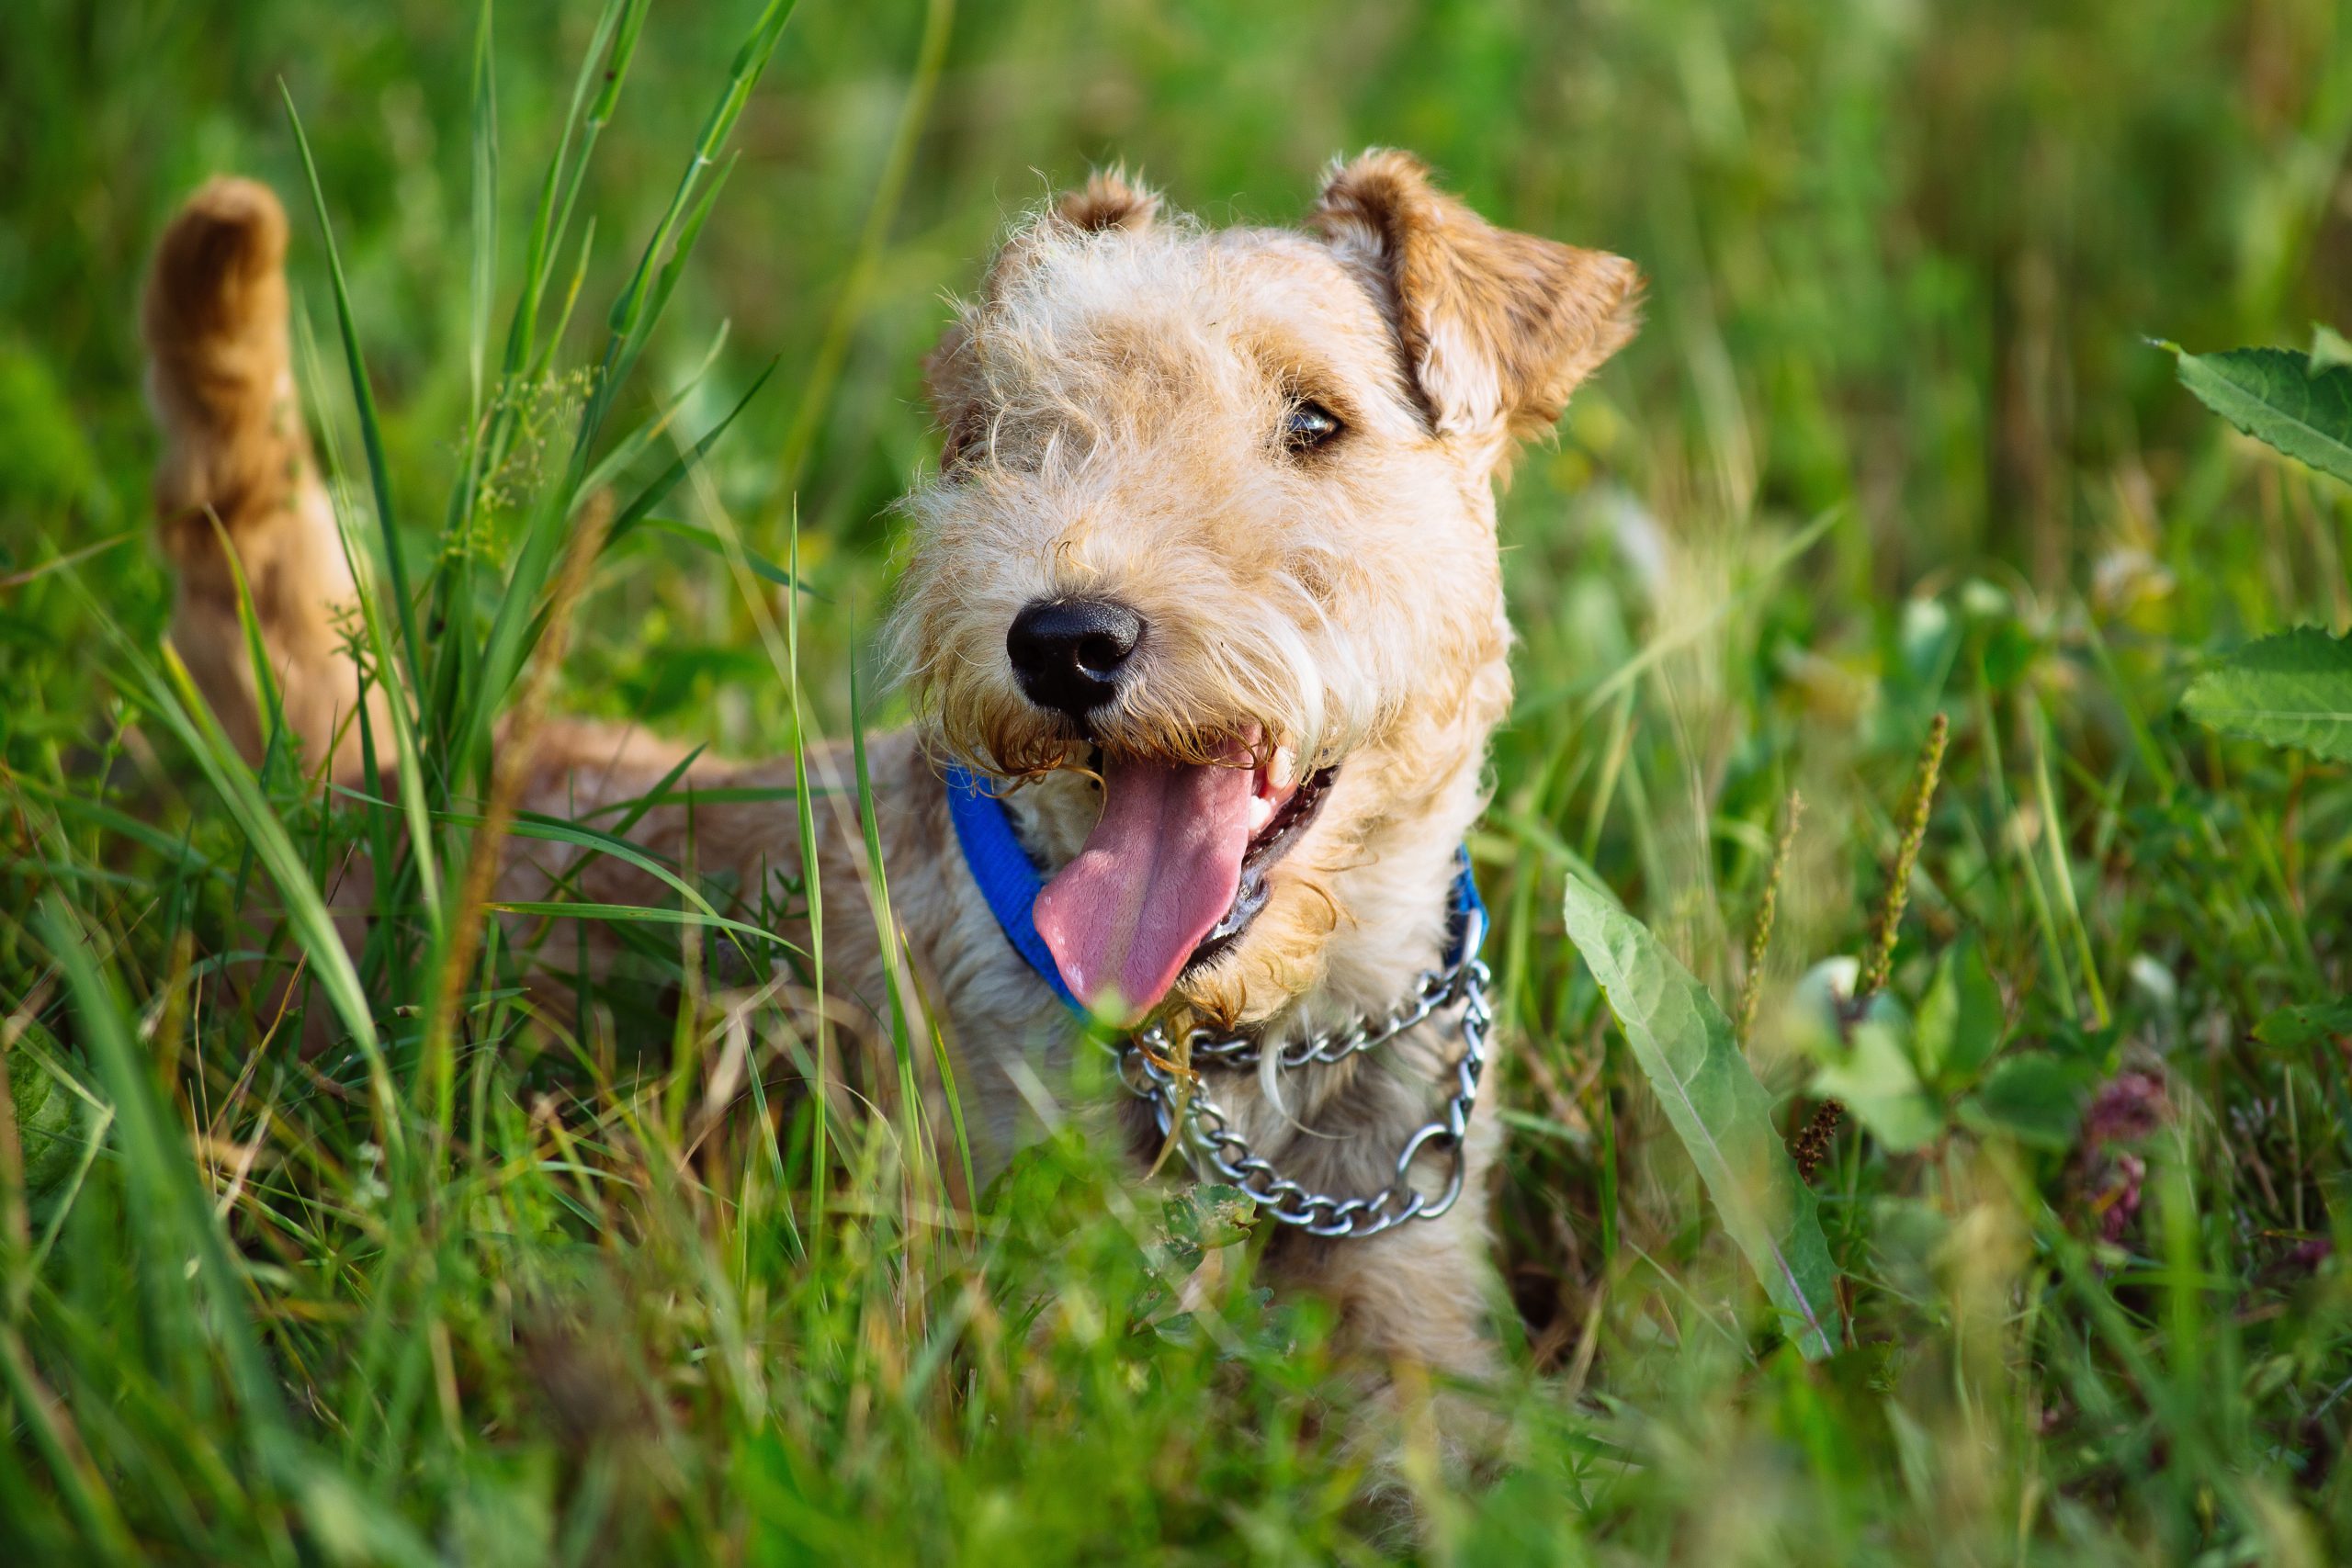 Lakeland,Terrier,Dog,Walking,Through,The,Tall,Grass,In,The